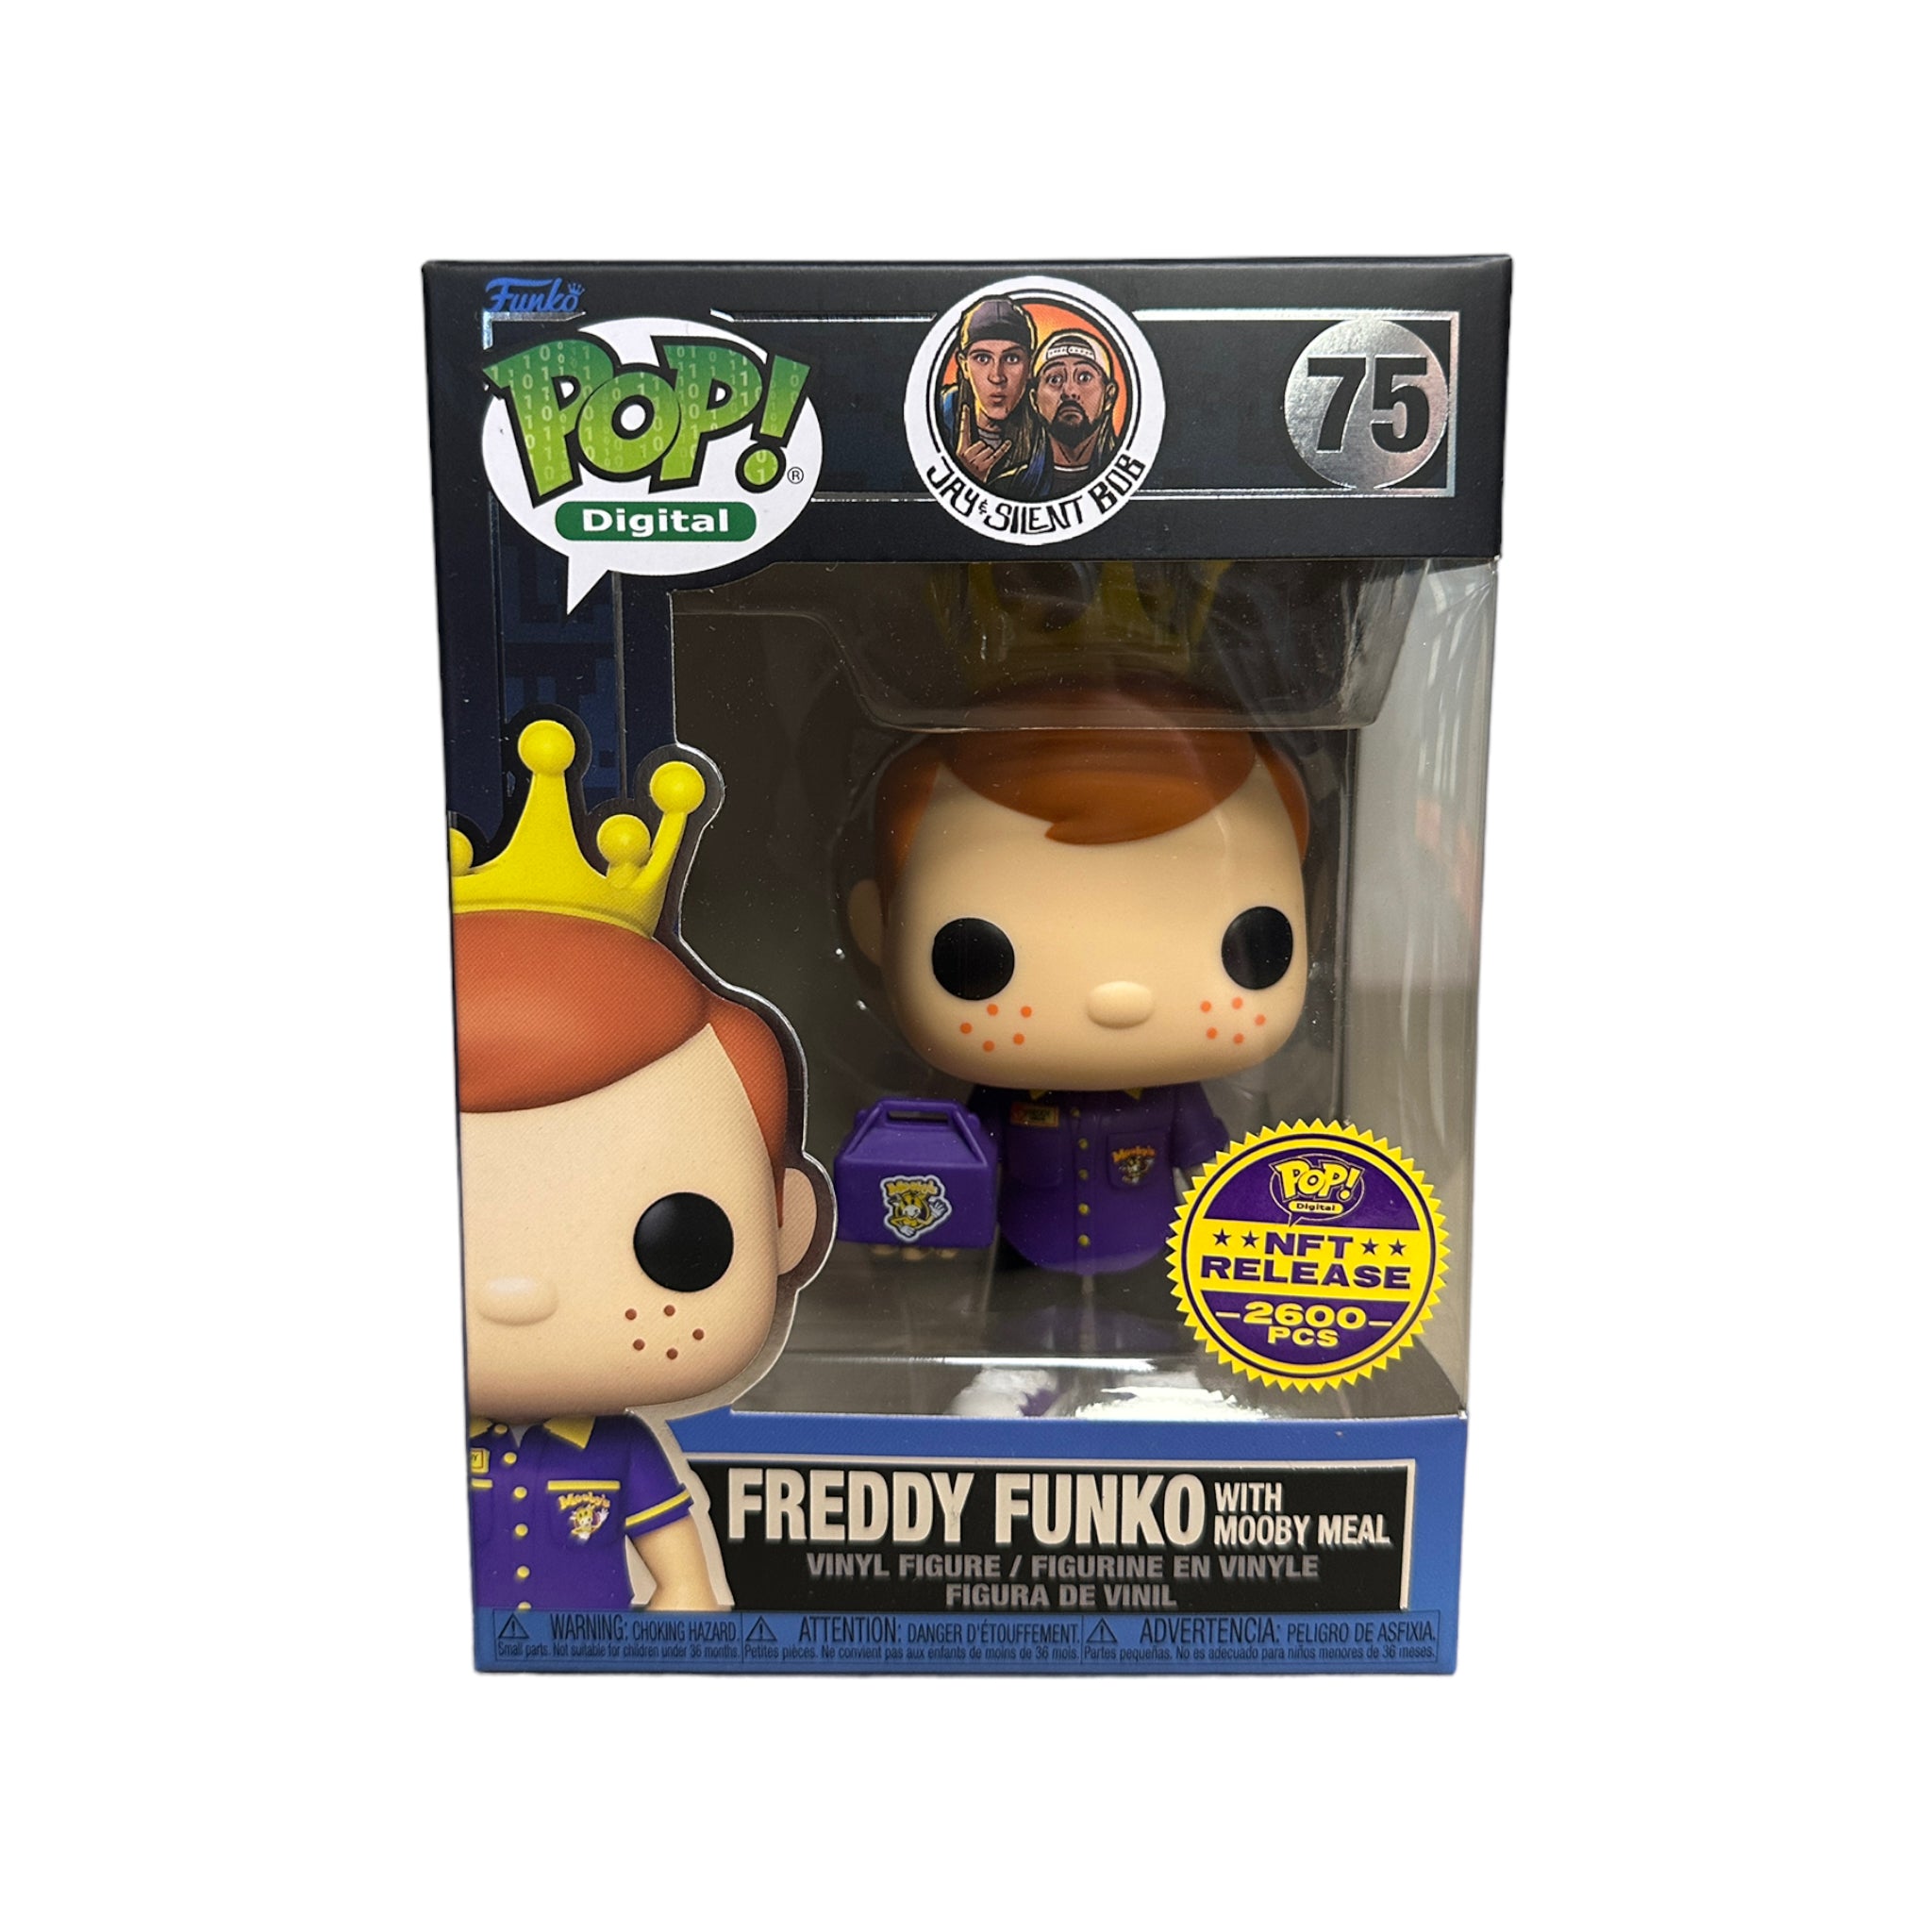 Freddy Funko with Mooby Meal #75 Funko Pop! - Jay & Silent Bob - NFT Release Exclusive LE2600 Pcs - Condition 9.5/10